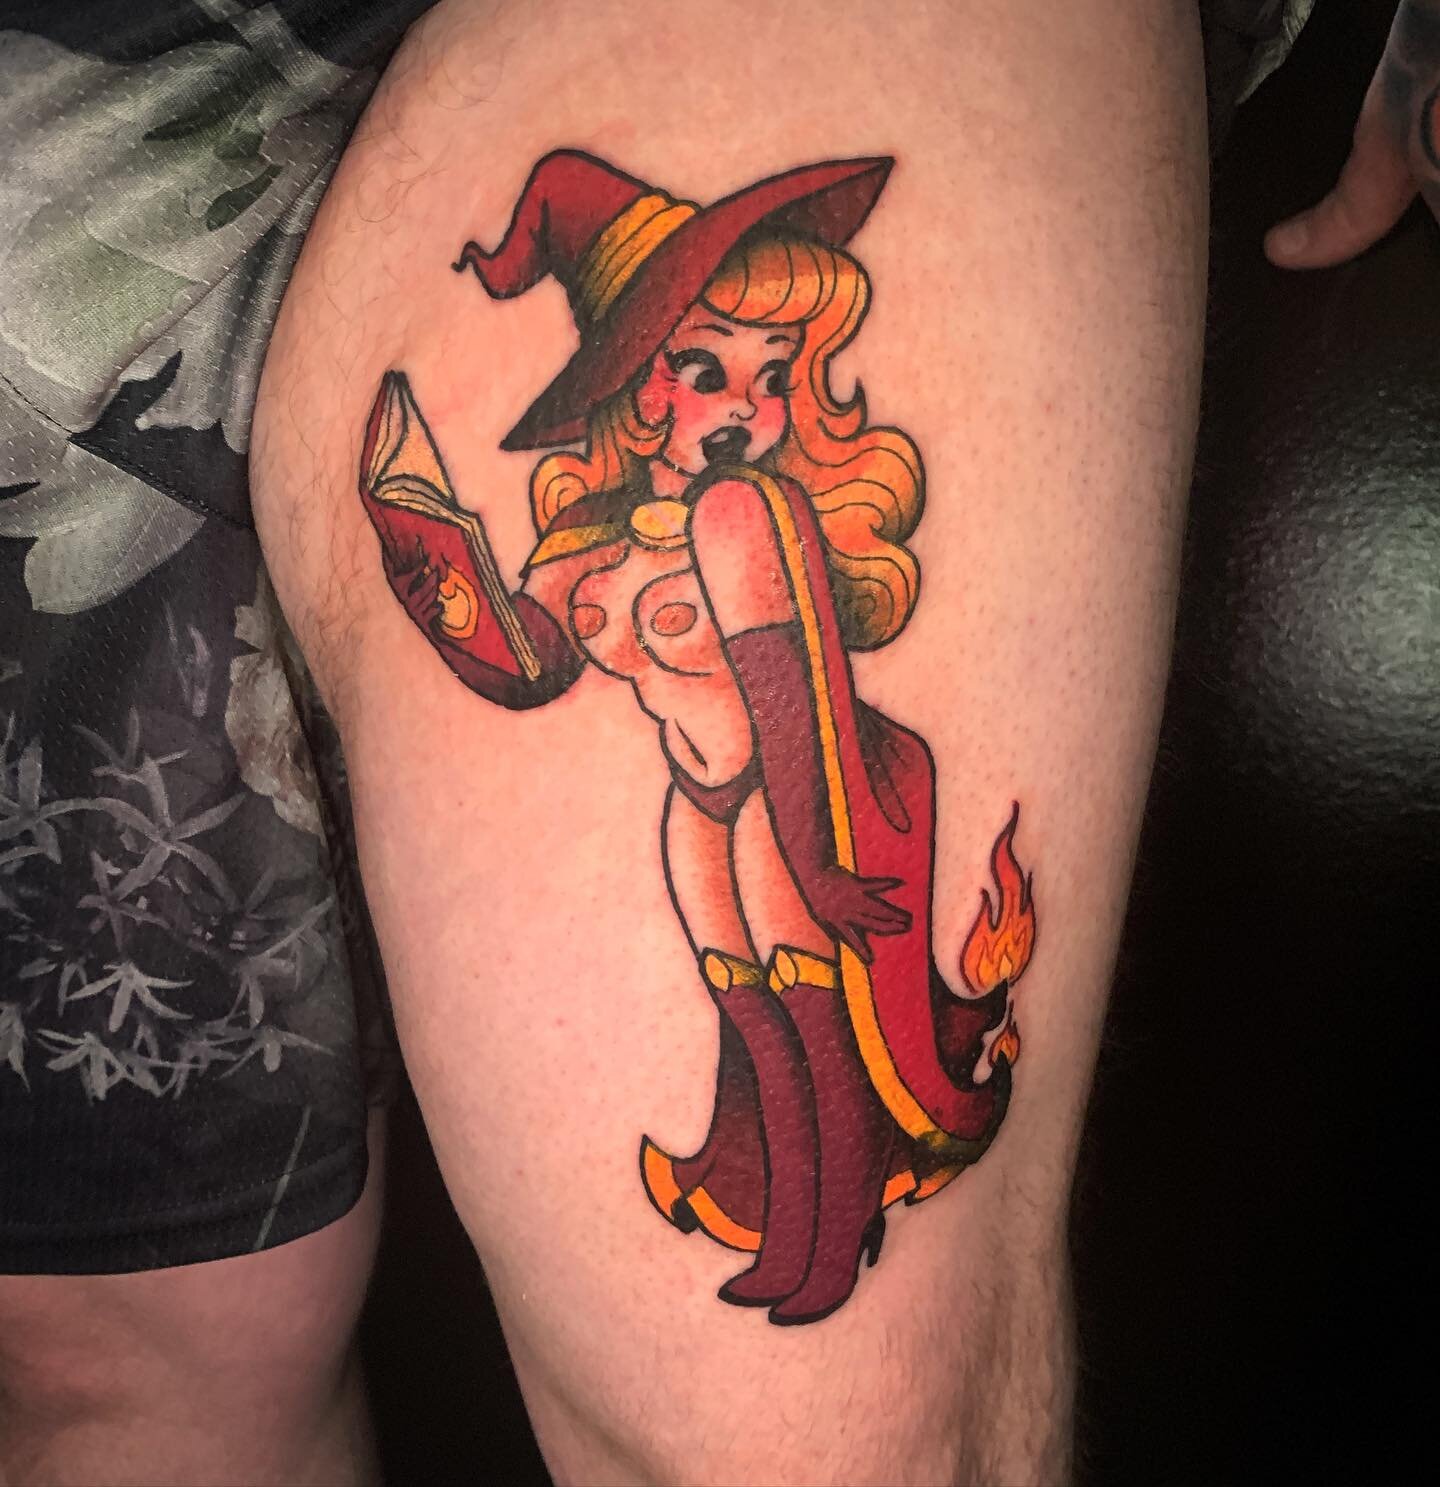 Fire mage, not so good at her tricks!
@vilainstattoo 
.
.
.
***I&rsquo;m only designing tattoos for people who can come to Montreal to get the tattoo. I won&rsquo;t answer messages otherwise. Please don&rsquo;t use my art without my consent.*** *I do